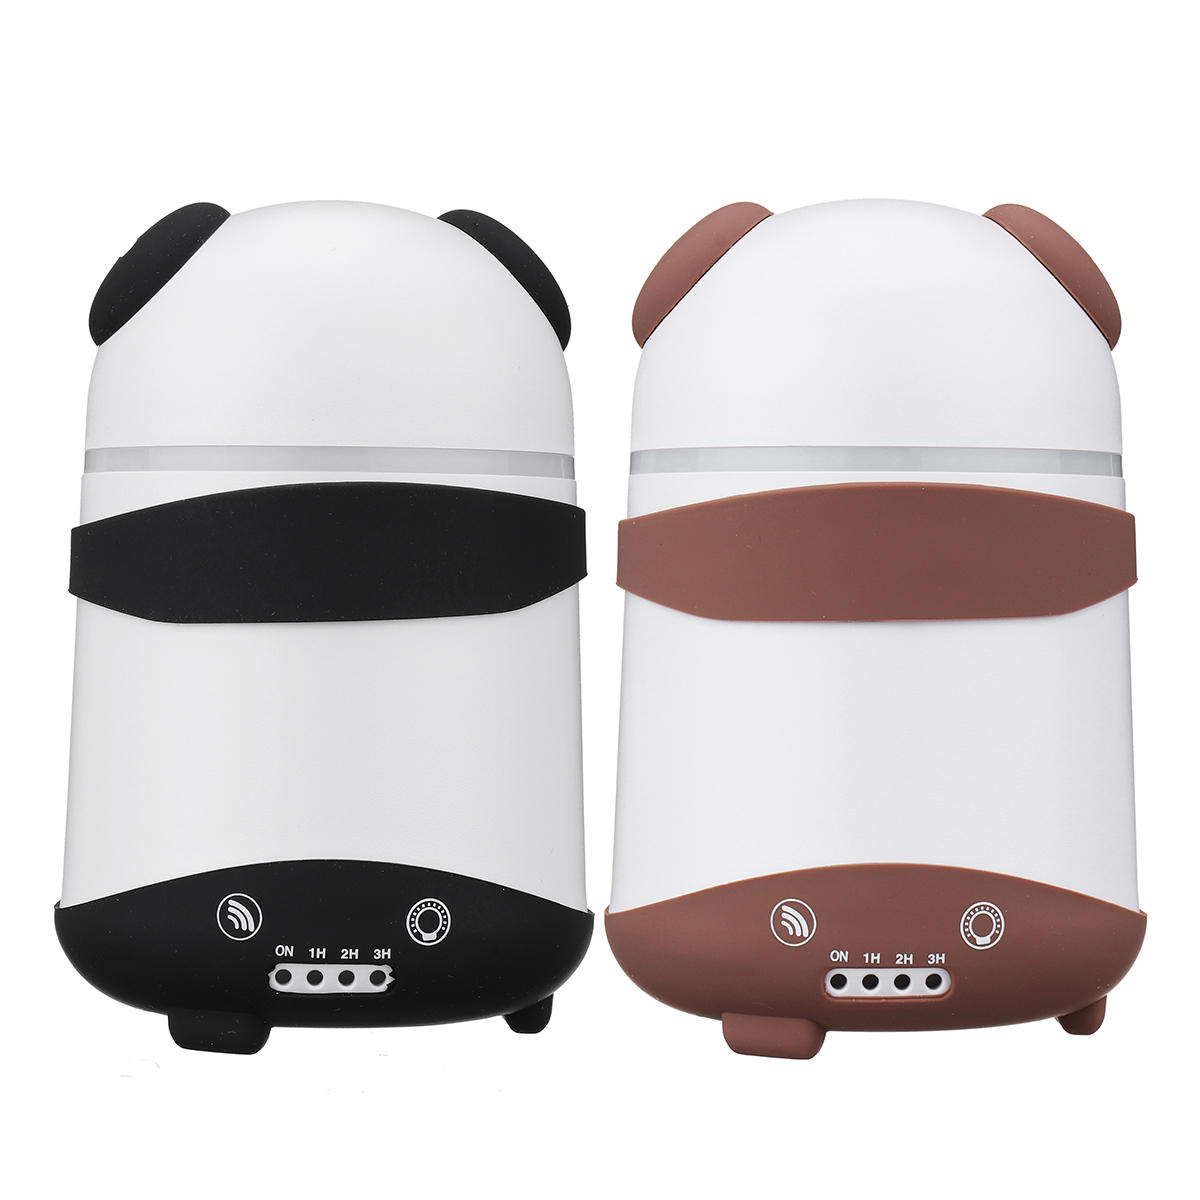 Dual Humidifier Air Oil Diffuser Aroma Mist Maker LED Cartoon Panda Style For Home Office US Plug